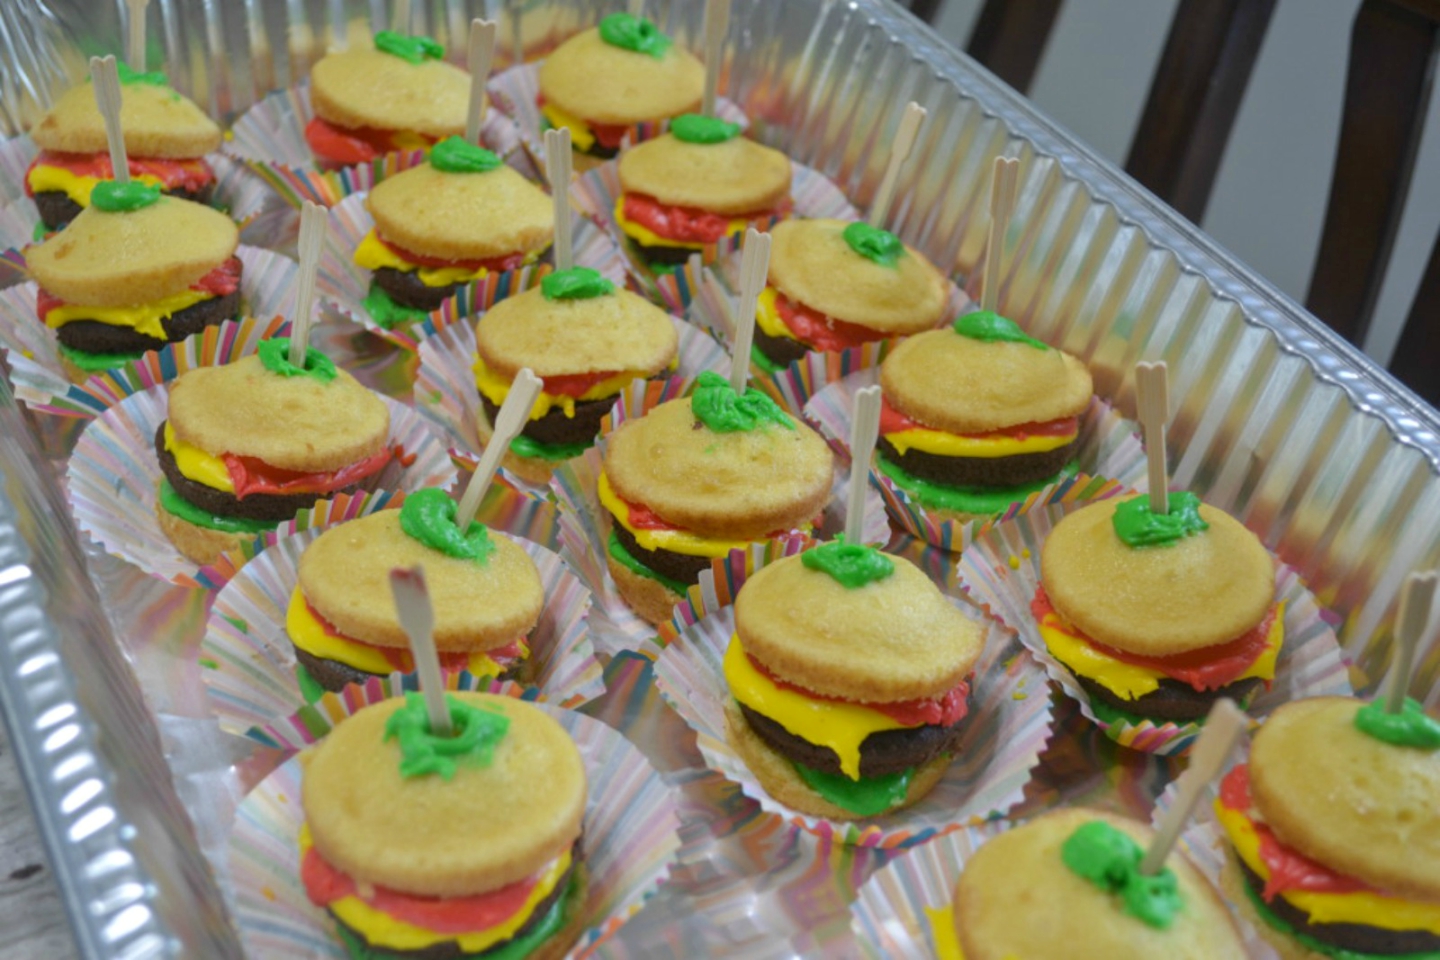 Cook-out Cupcakes are a fun and tasty summertime dessert. Cupcakes are decorated to look like a cheeseburger. Loved by adults as well as children.